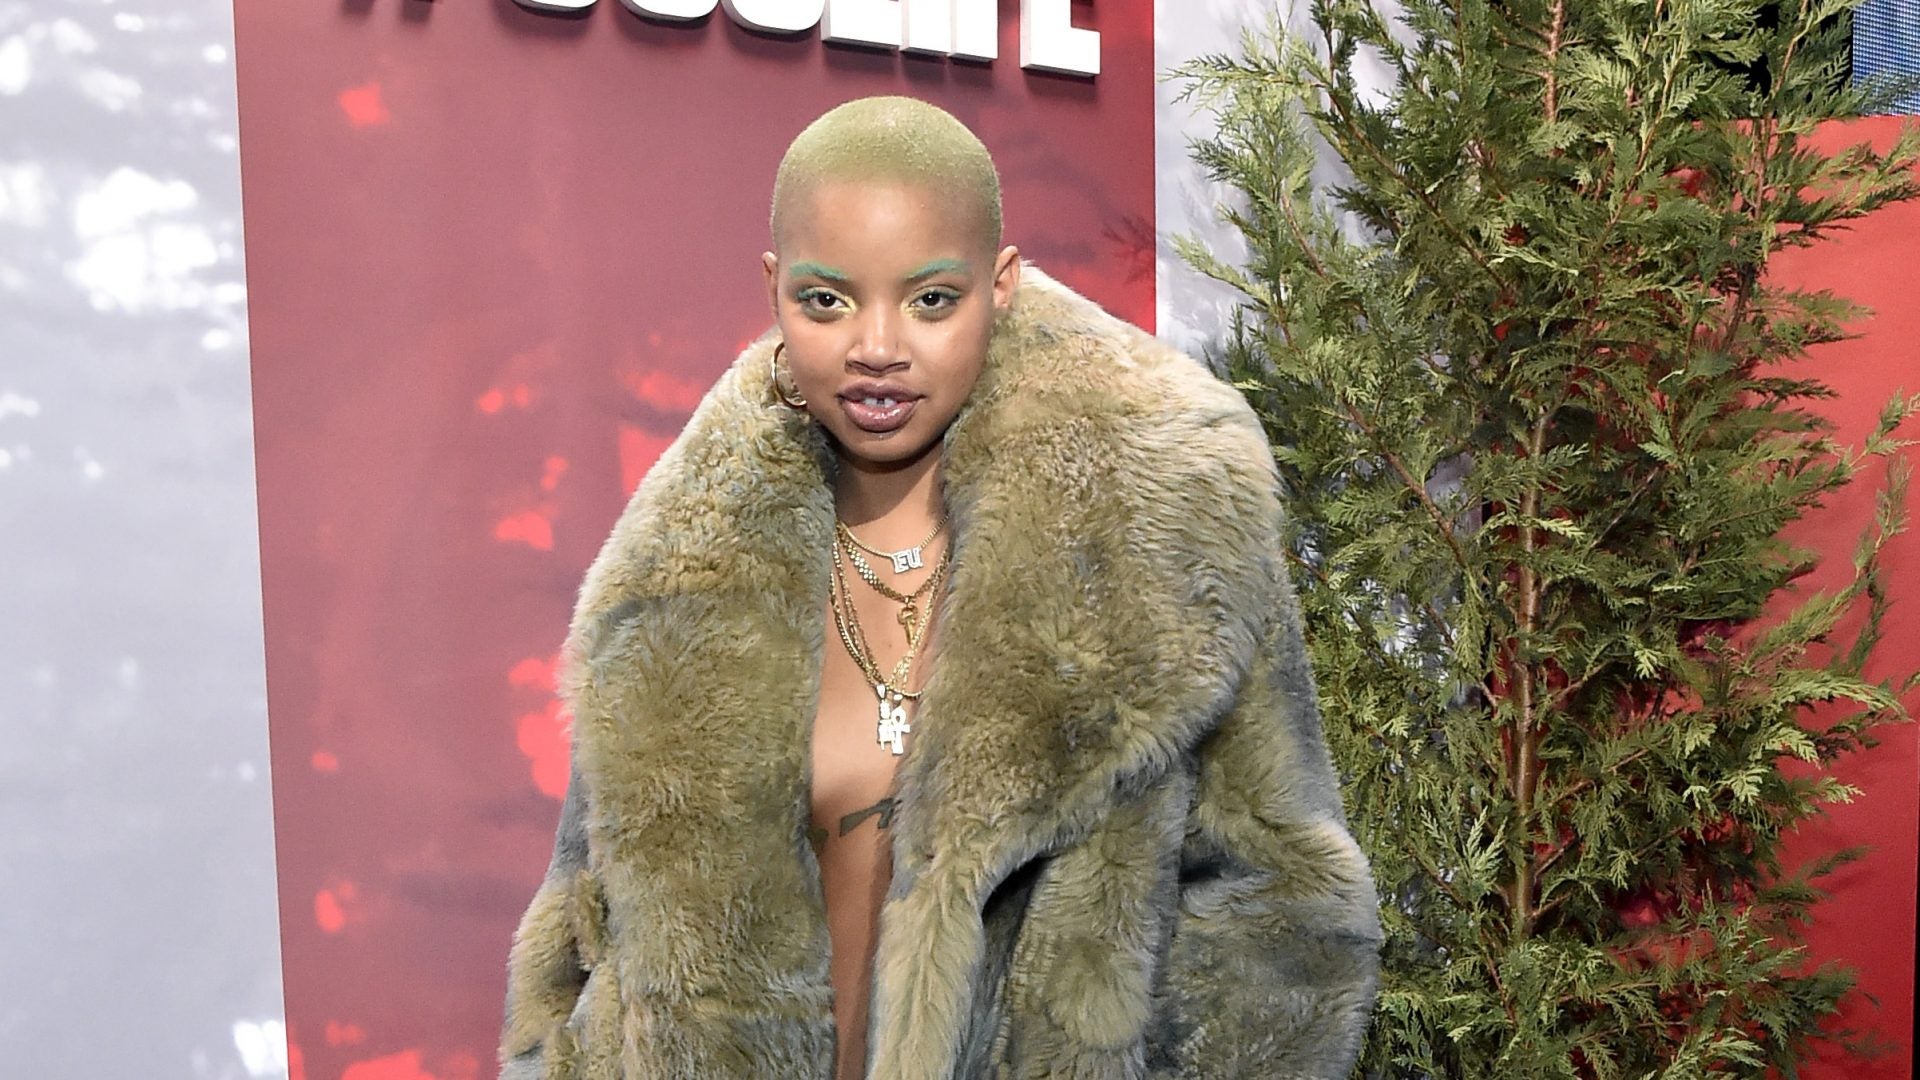 Model-Actress Slick Woods Is All Smiles After Suffering 'Unexpected Seizure'